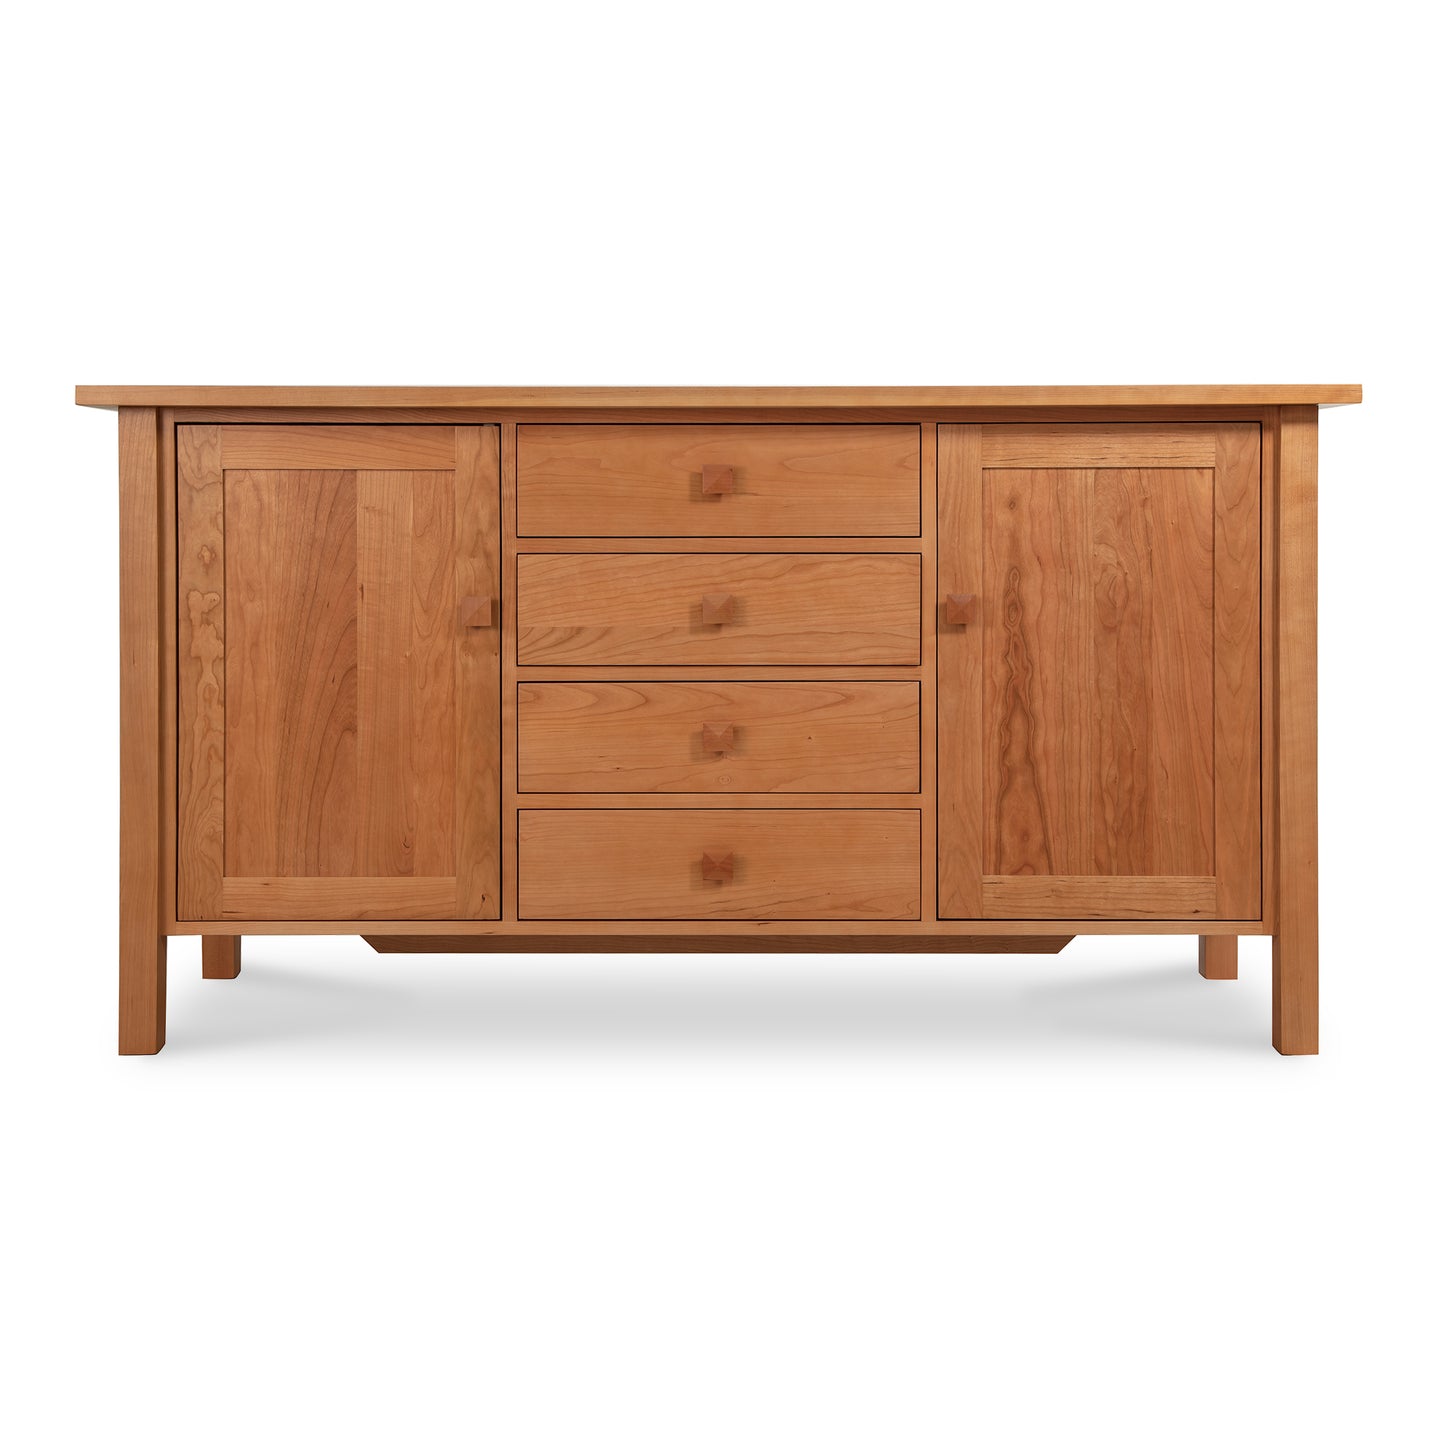 A Lyndon Furniture Modern Mission Sideboard with modern styling and drawers.